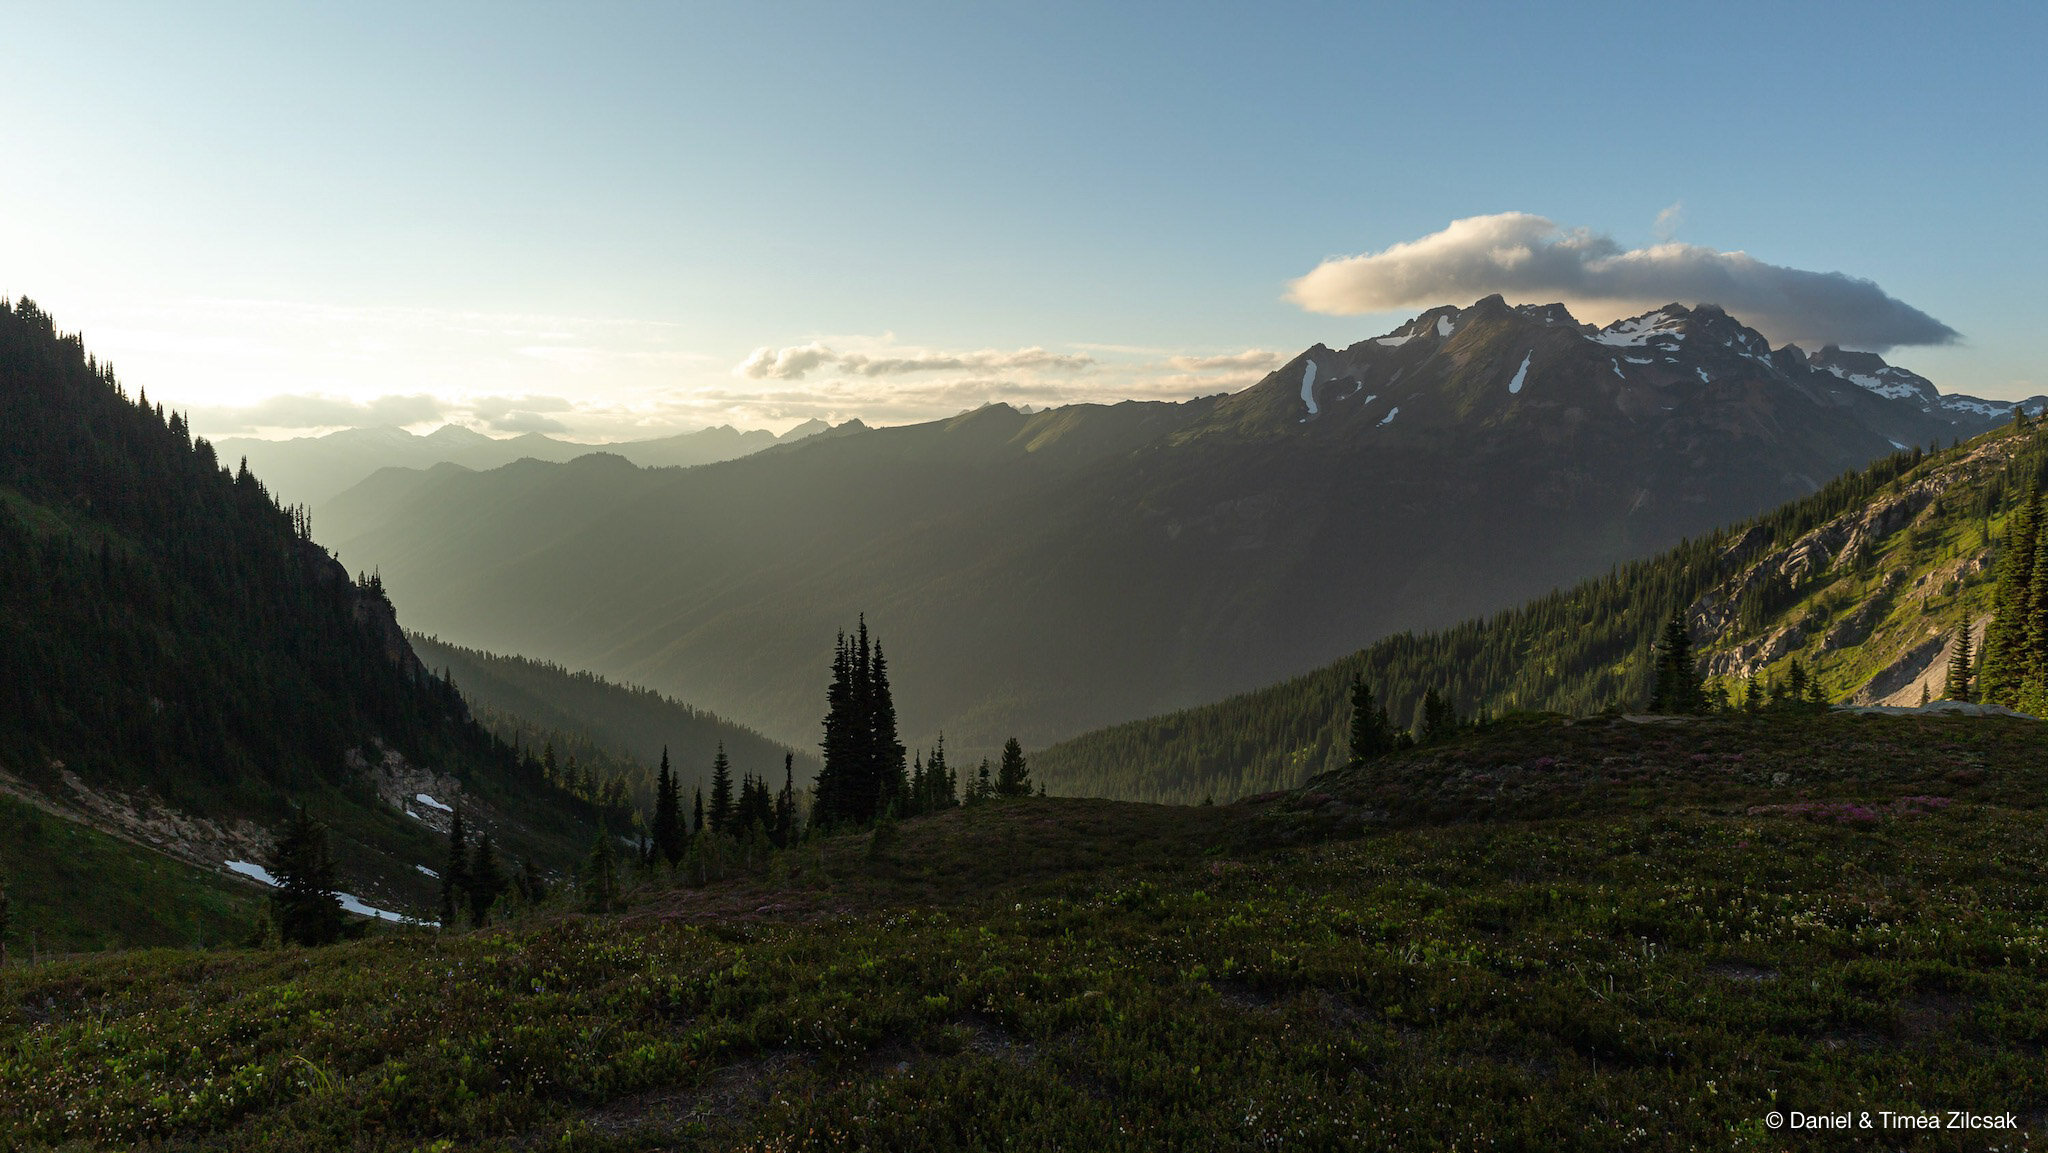 Sunset view from Sheep Camp - Backpacking Glacier Peak